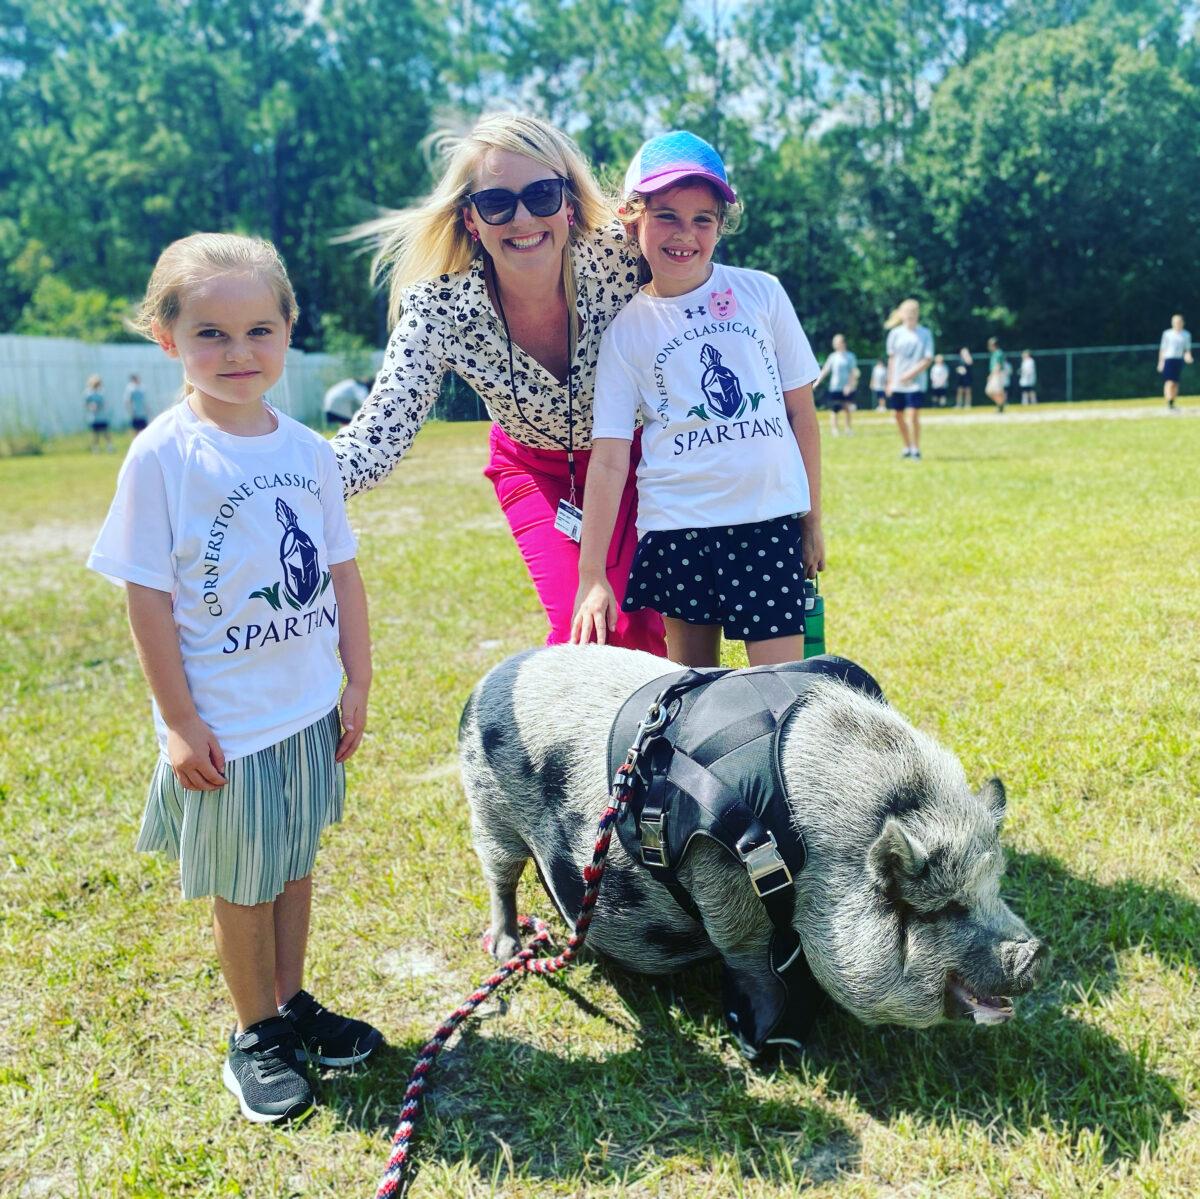 Lindsey Hoyt with her two daughters. Cornerstone Classical Academy second graders had just finished reading Charlotte's Web, so they brought a pig to campus to celebrate their accomplishment. (Courtesy of Lindsey Hoyt)